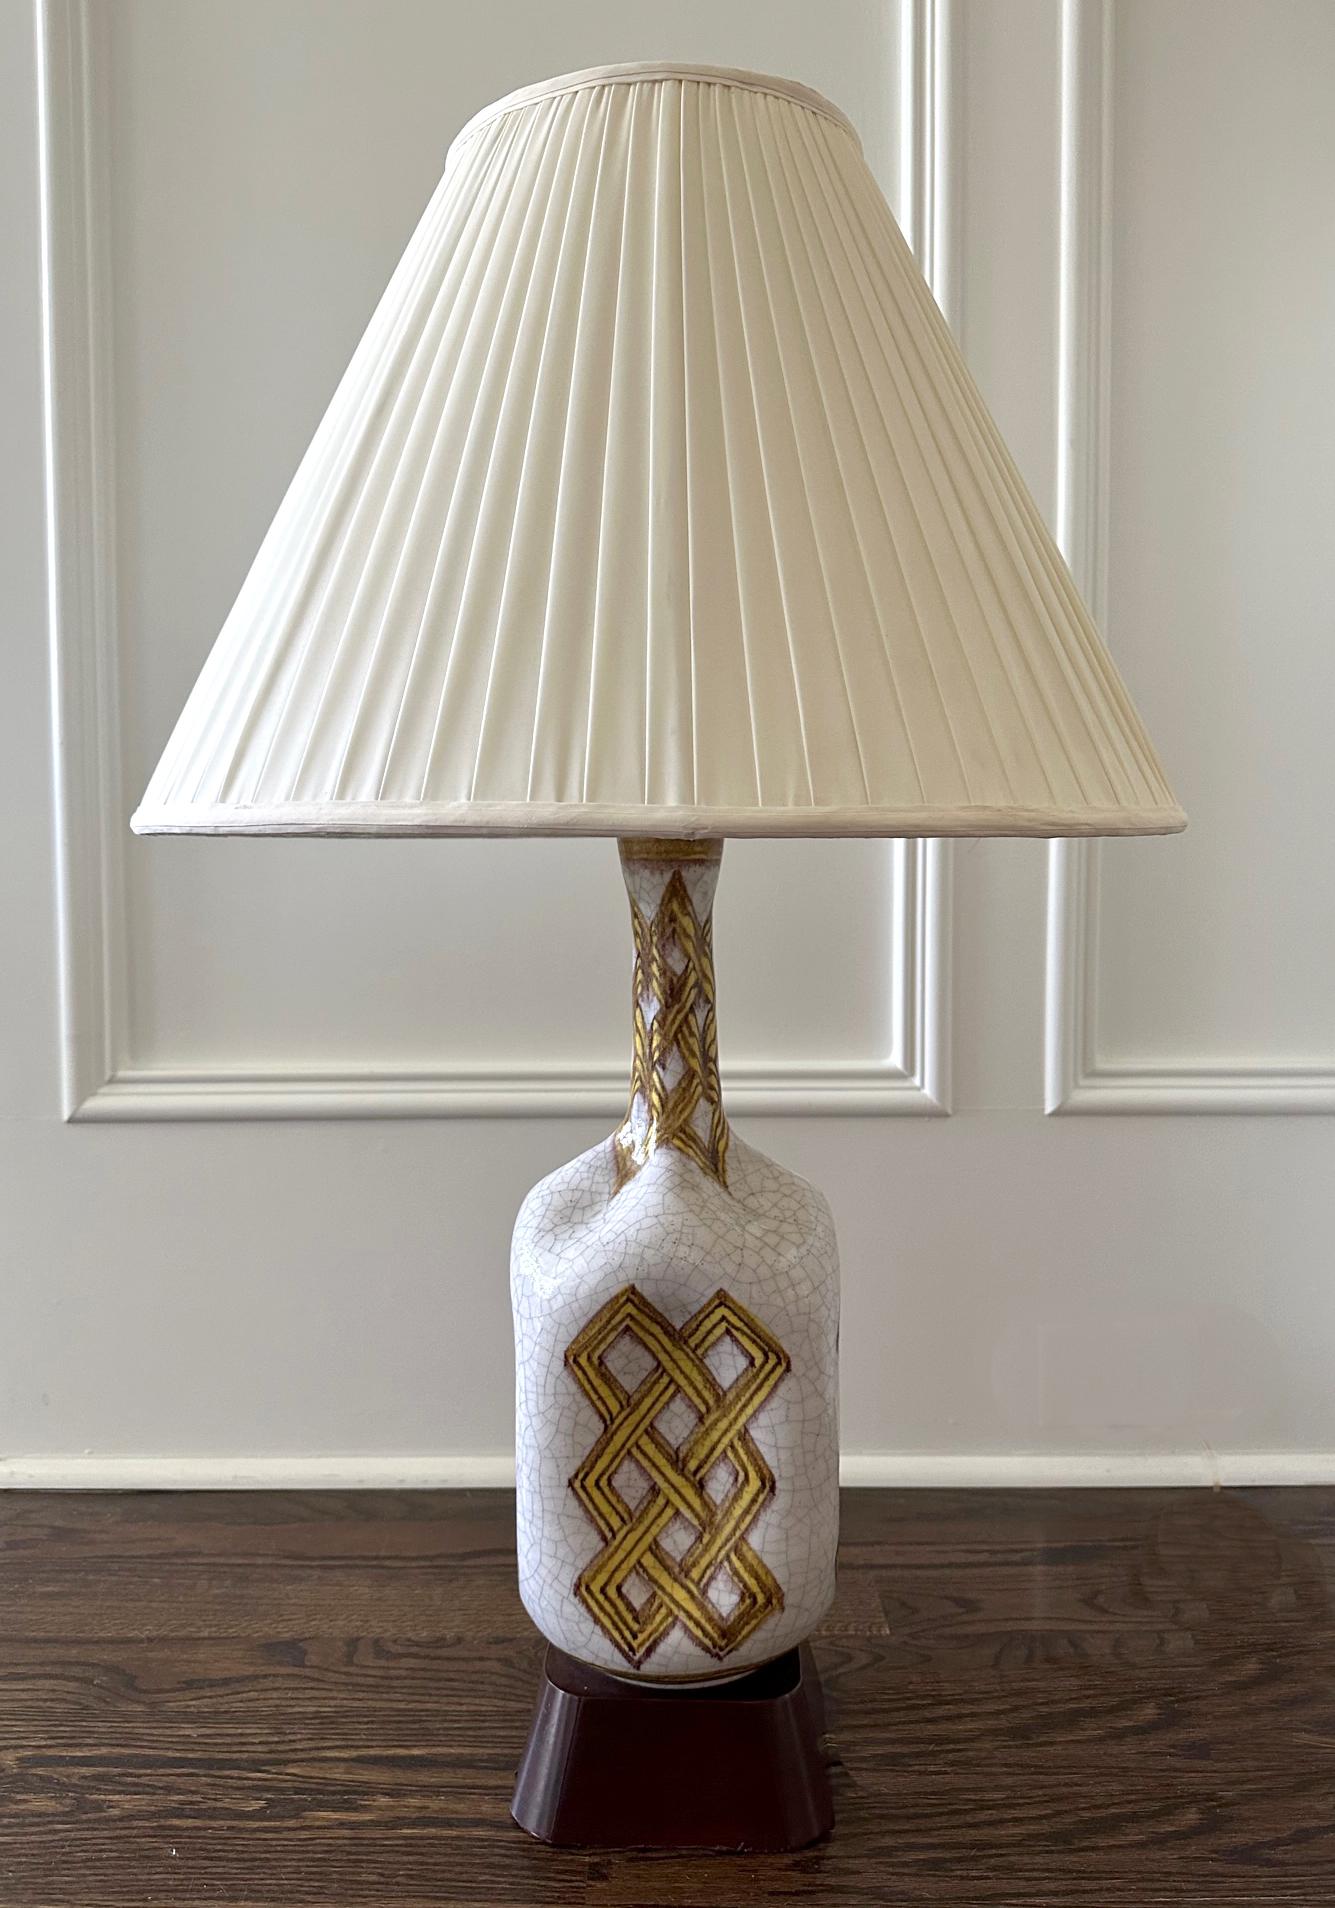 A large Italian ceramic table lamp designed and made by Guido Gambone (1909-1969), an Italian ceramic artist based in Florence, circa 1950s. The stoneware lamp base is of a long-neck bottle shape and impressive size. The surface is decorated with